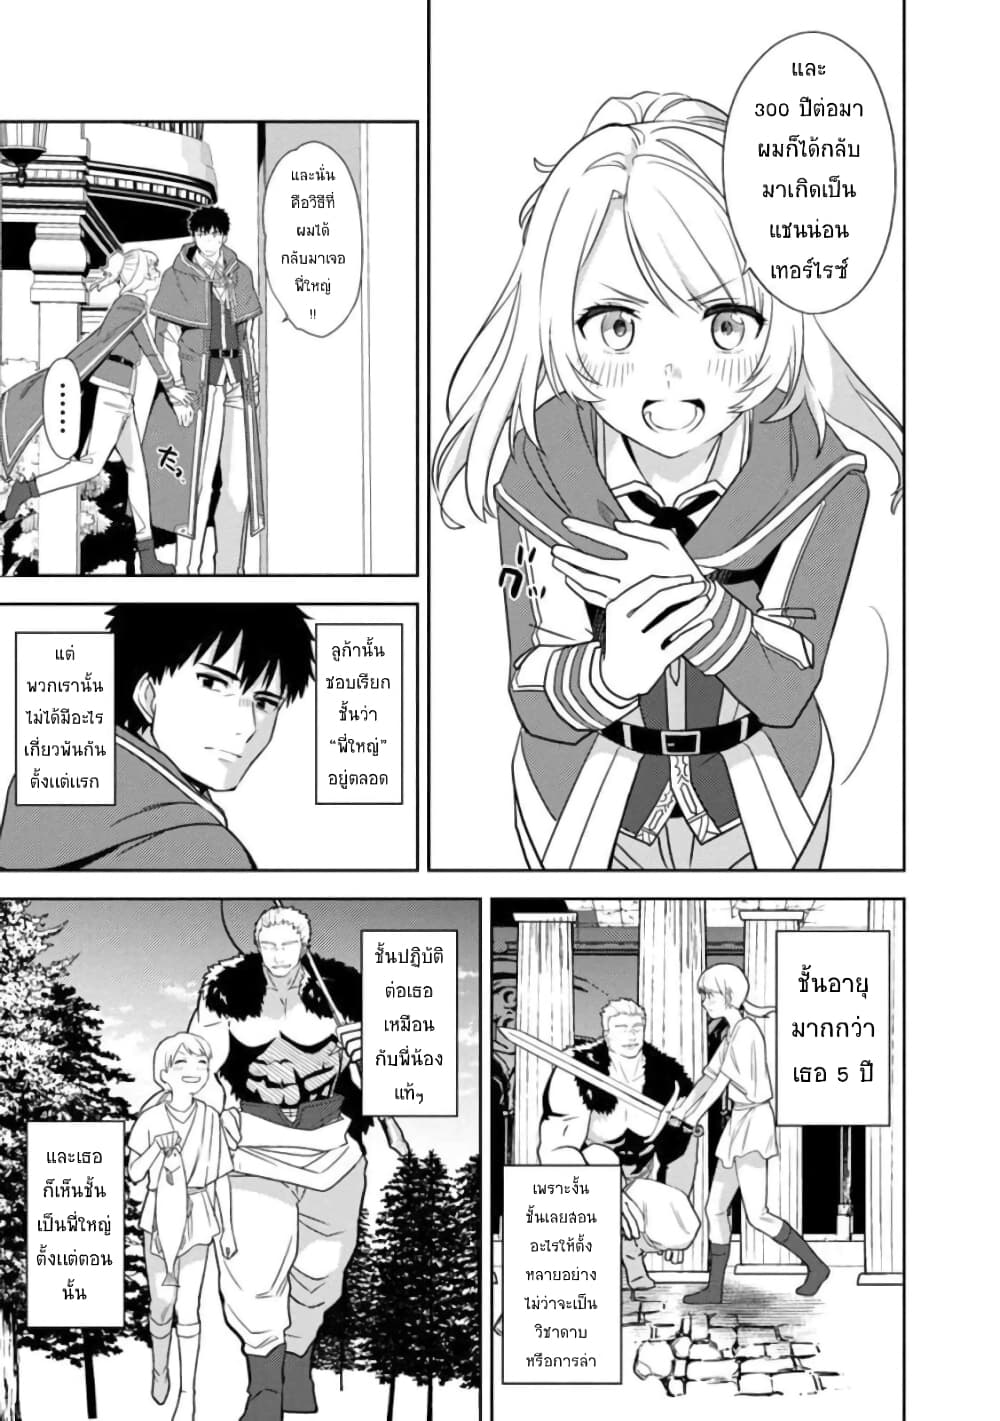 The Reincarnated Swordsman With 9999 Strength Wants to Become a Magician! ตอนที่ 2.1 (5)